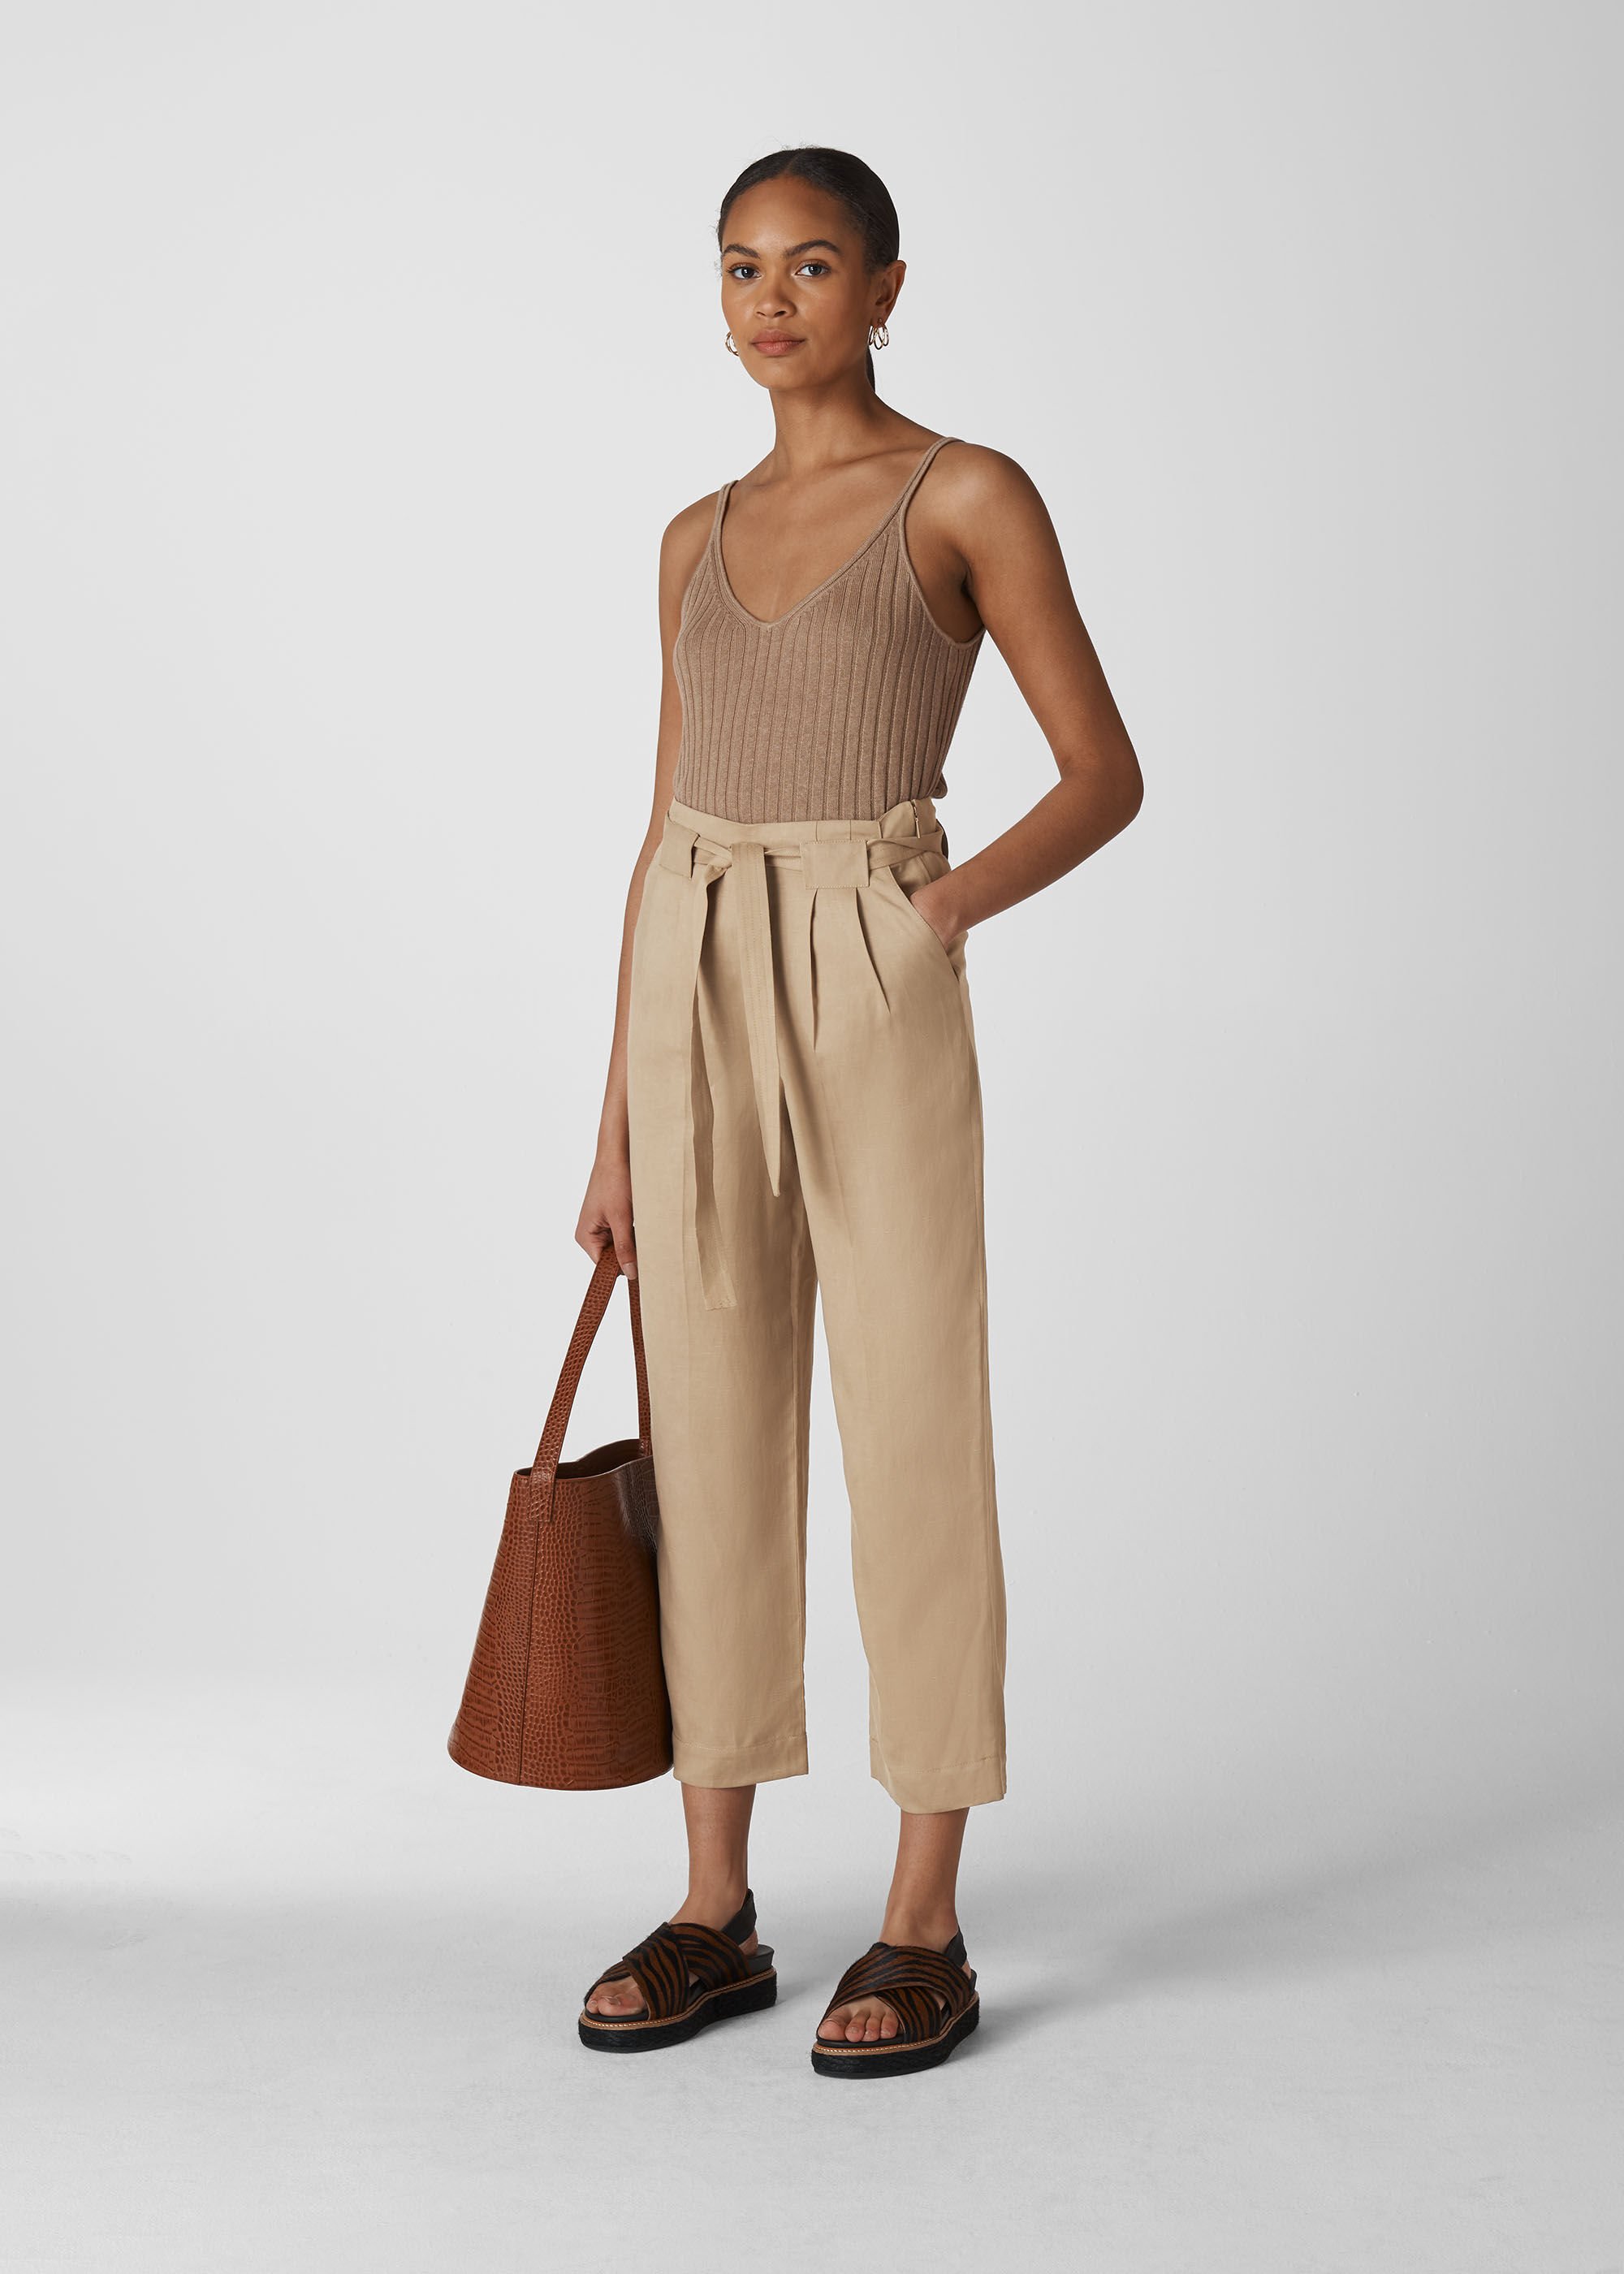 GANT WIDE CROPPED BELTED PANTS  Trousers  light copperbrown   Zalandocouk